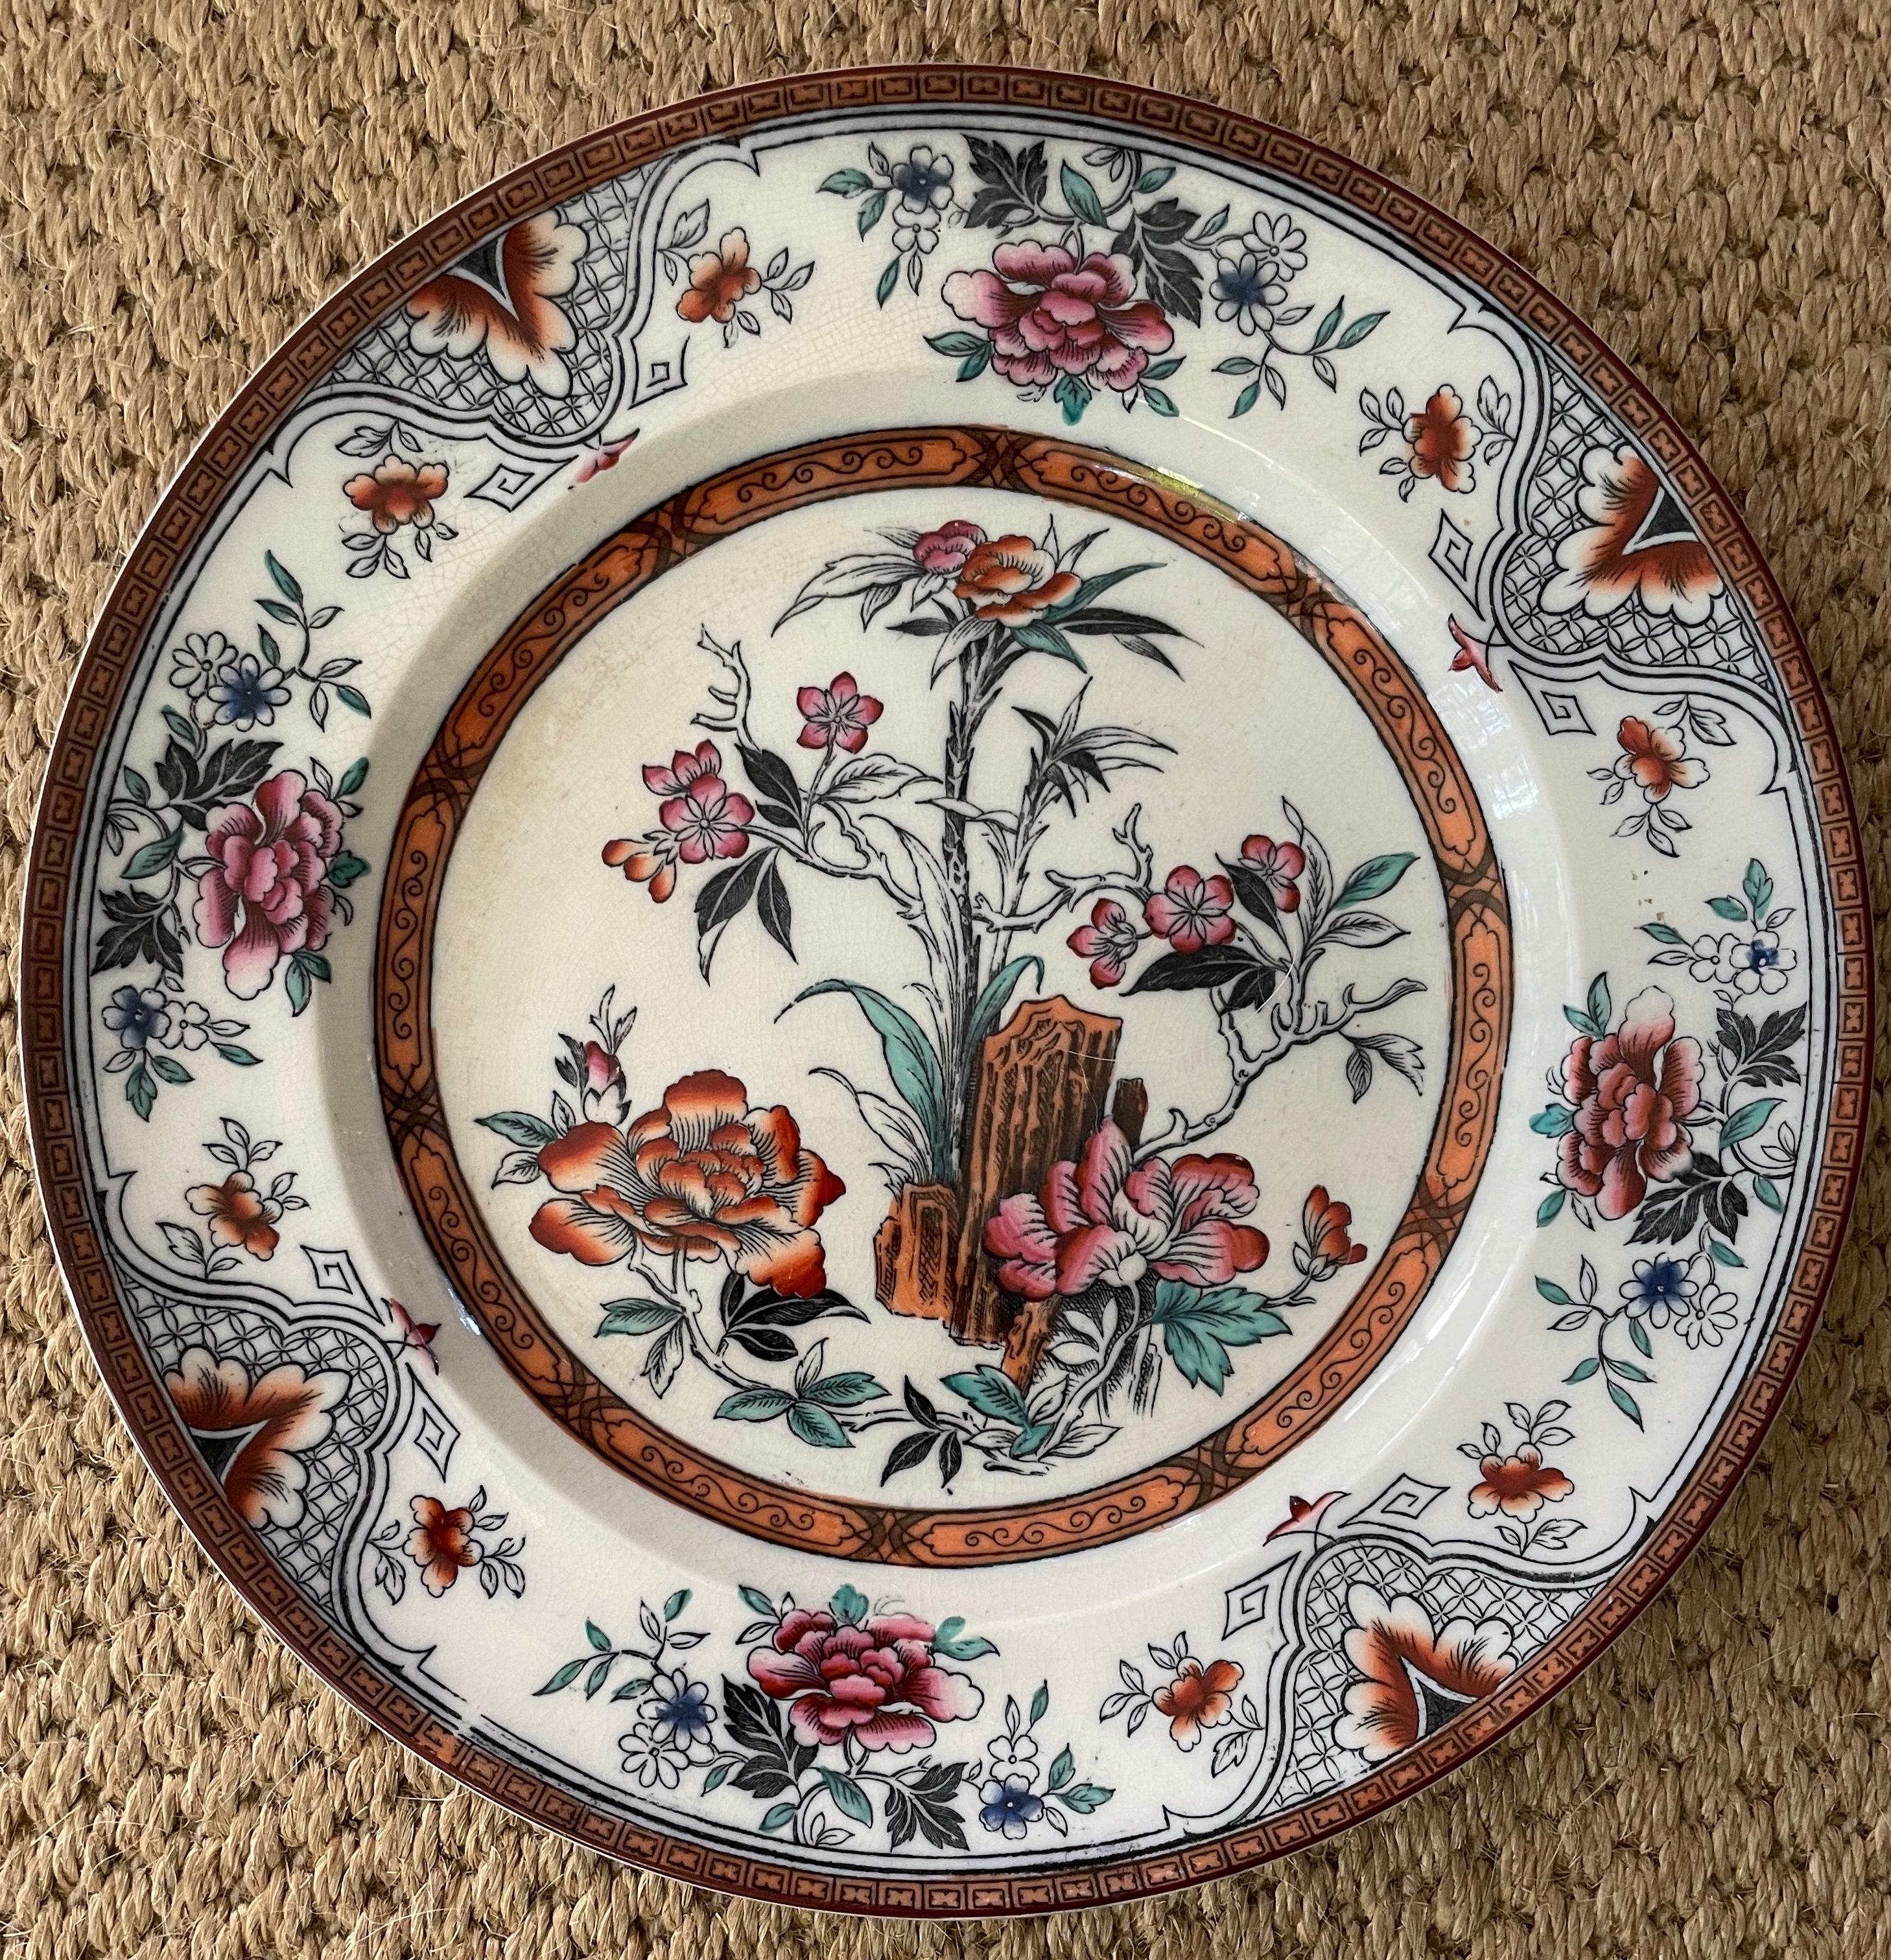 Set of Ten Wedgwood Chinoiserie Plates 1